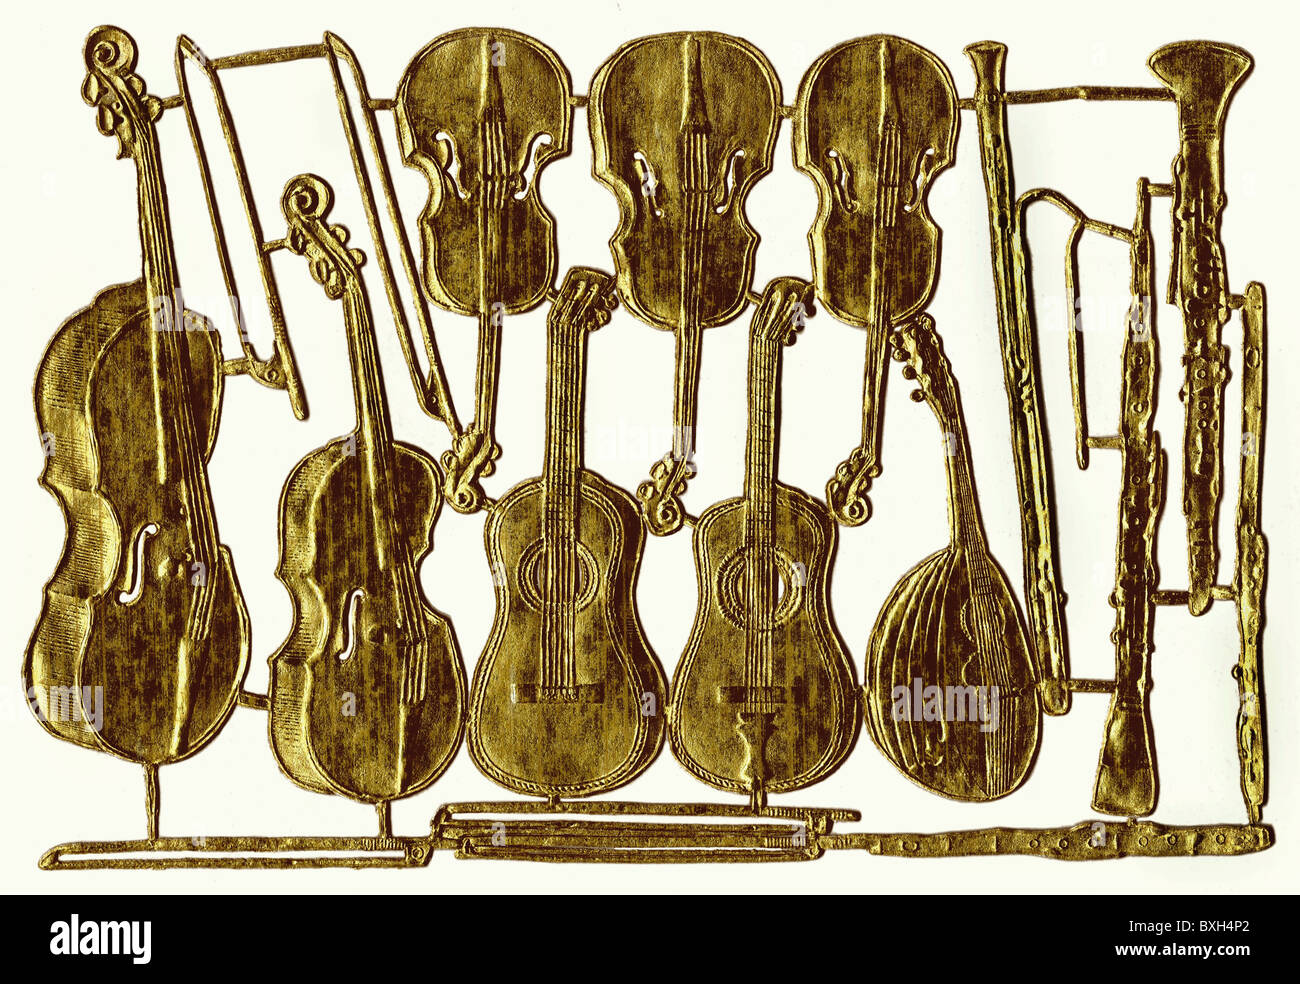 music, instruments, bowed instruments, Great Britain, circa 1905, Additional-Rights-Clearences-Not Available Stock Photo